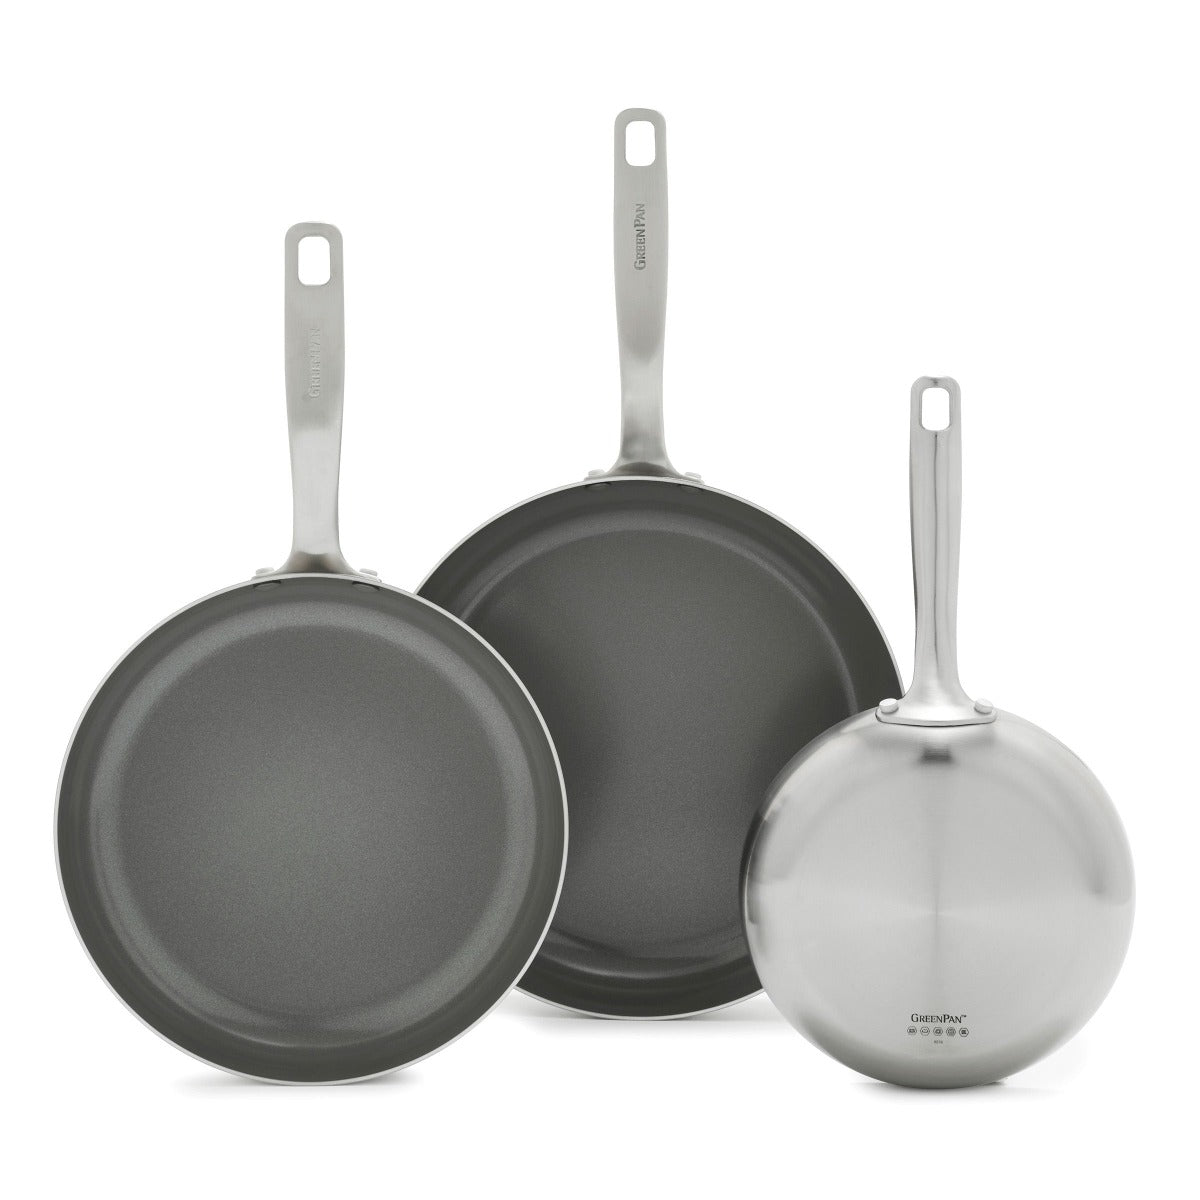 Merten & Storck Tri-Ply Stainless Steel Induction 10 & 12 Fry Pan Set  with Lids, Silver 